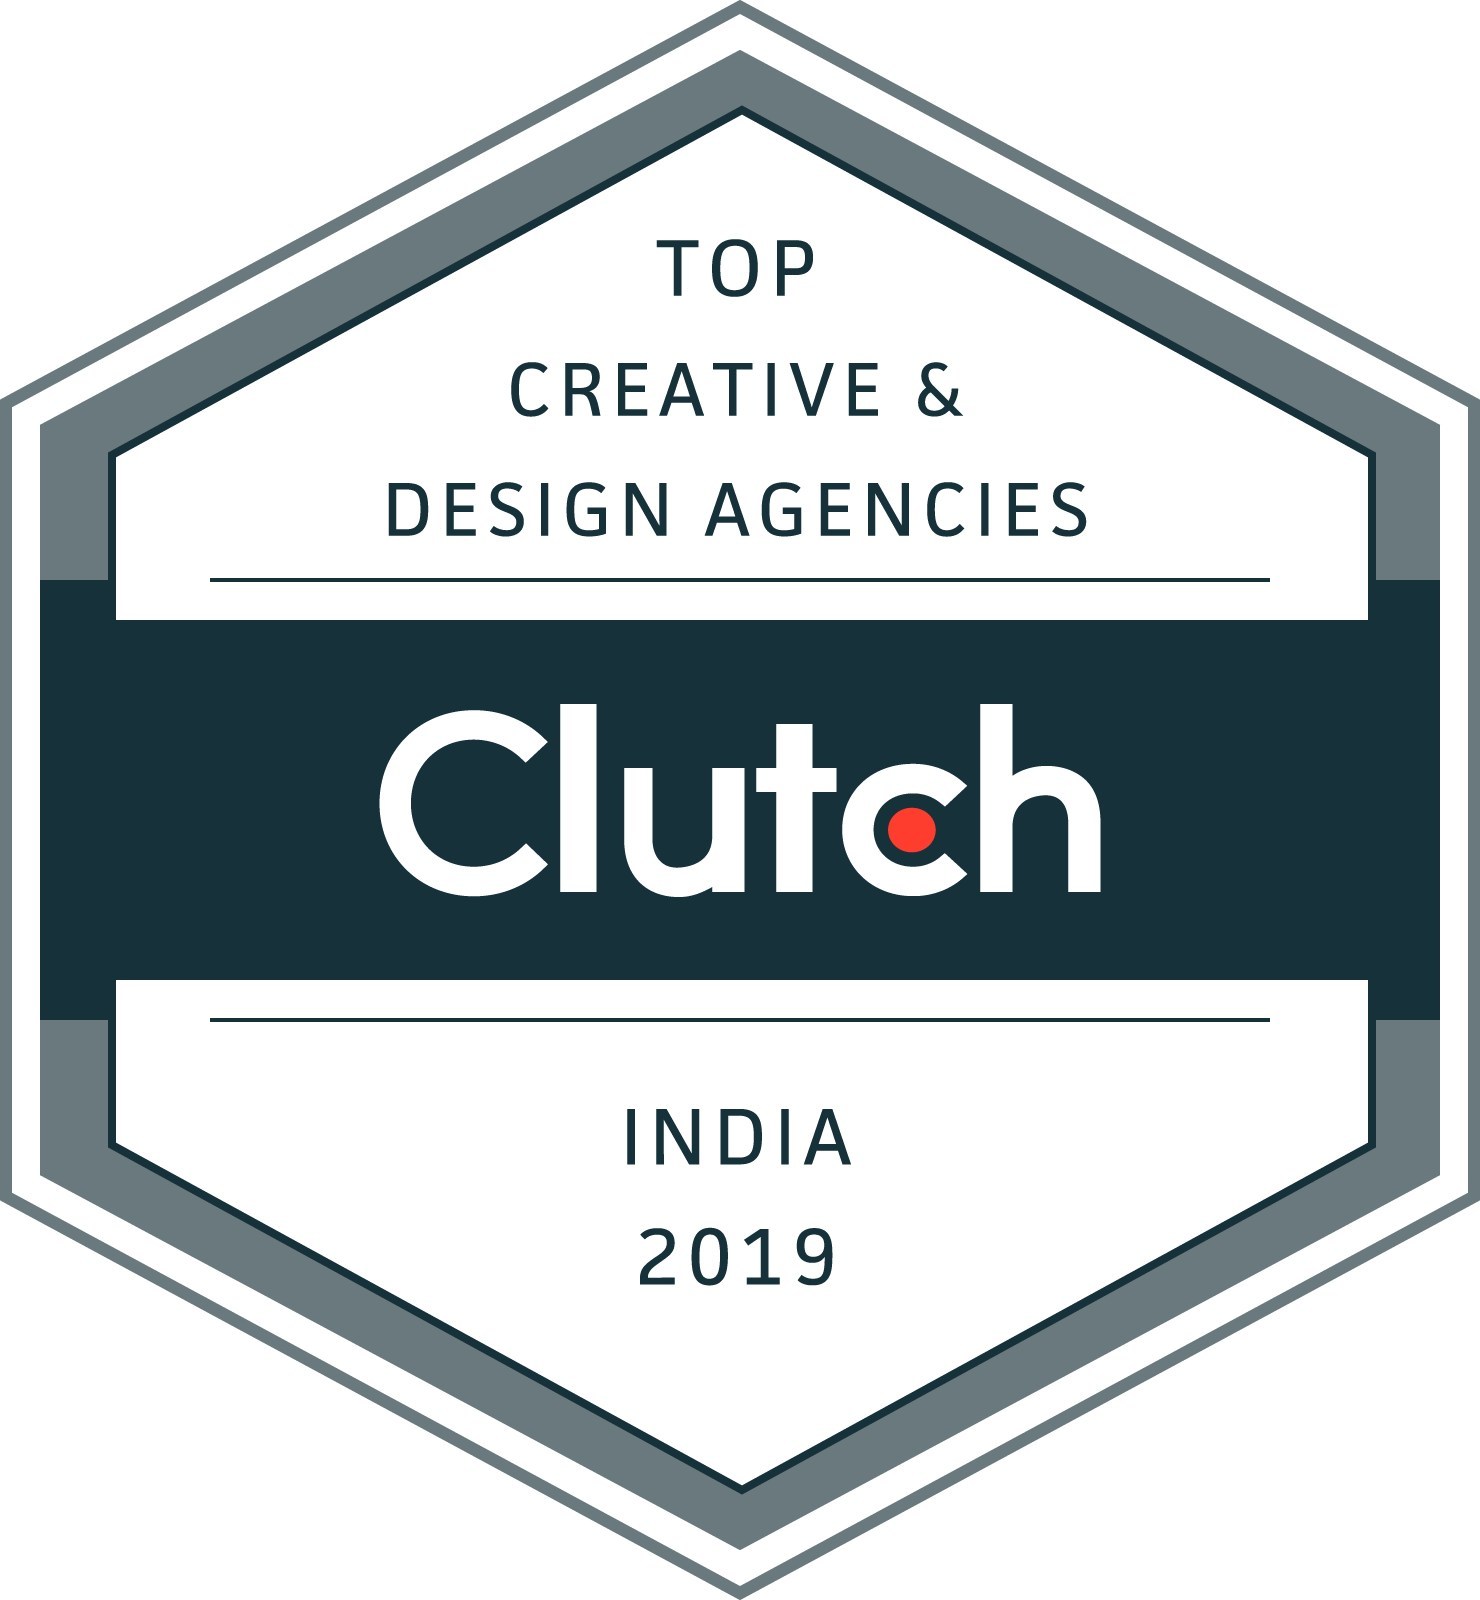 Clutch Badge - Top Creative and Design Agencies in India